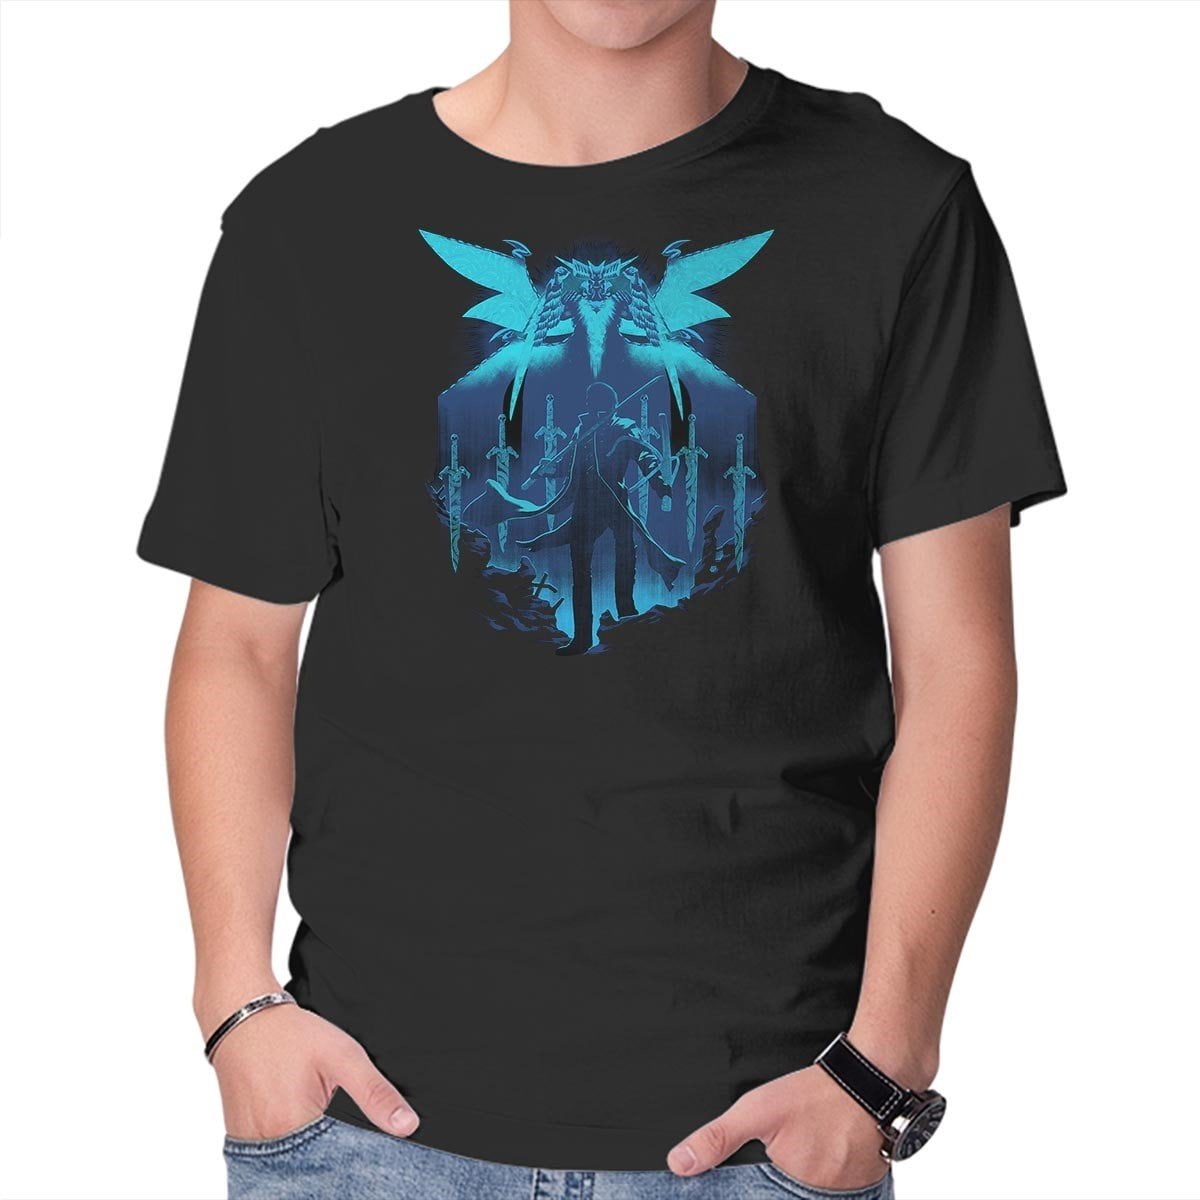 TeeFury Men's T-shirt Graphic T-shirts Blue King - devil may cry, gaming,  video game, sword, blue, wings, grave, villain, greek 